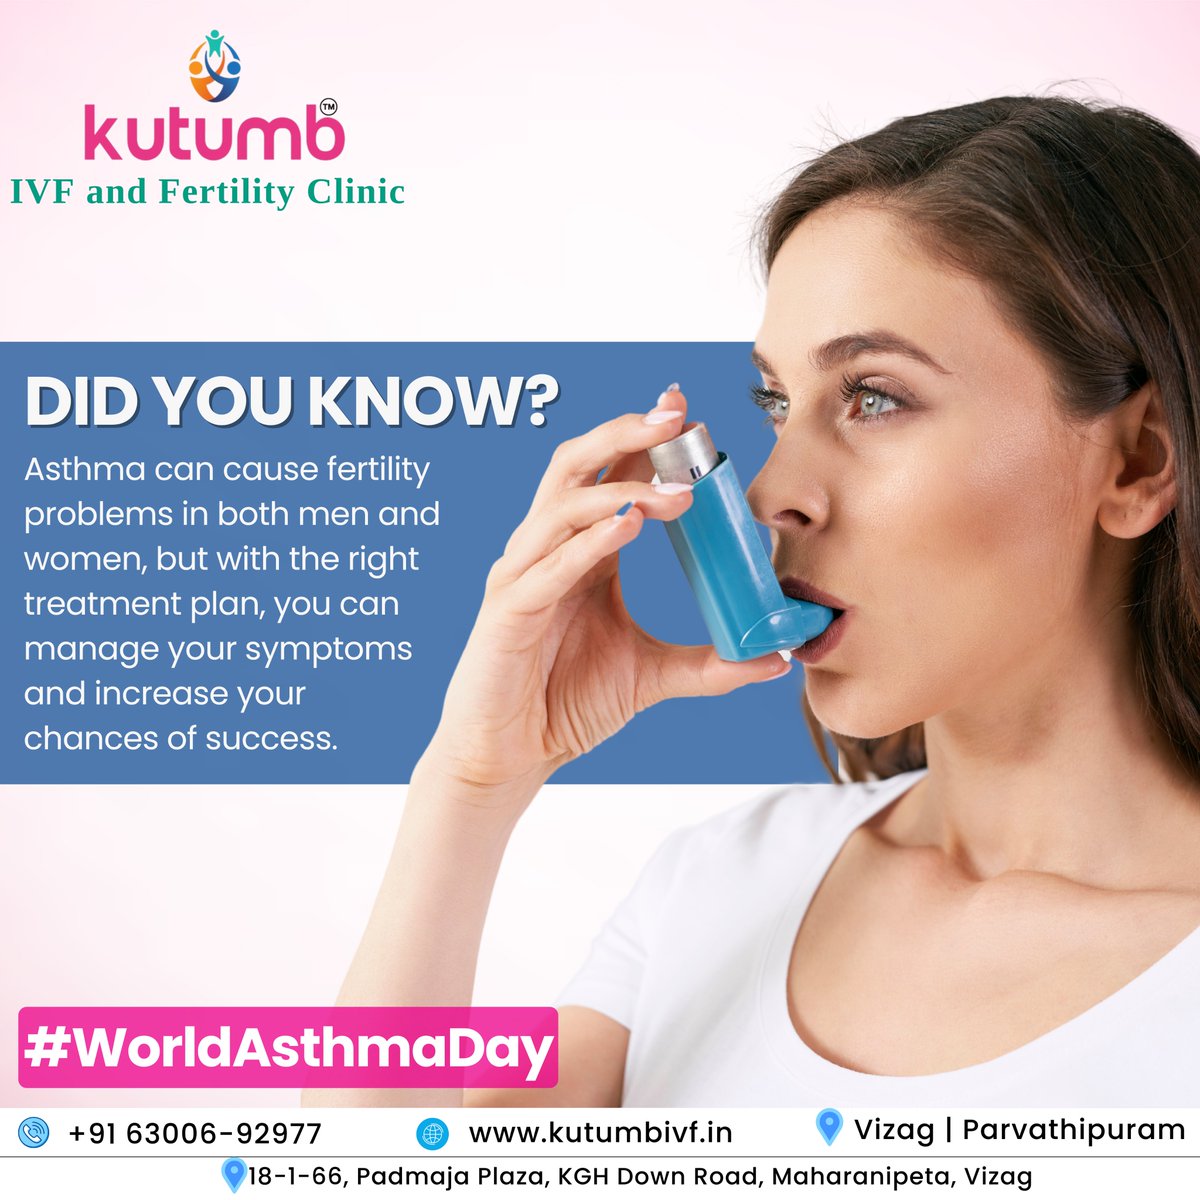 Unlock Your Fertility Potential: Manage Asthma with Expert Guidance!
Contact our expert now: +91 63006-92977
#asthma #WorldAsthmaDay #asthmaday #pregnancy #parenthood #ivf #ivfcost #testtubebaby #testtubebabycentre #ivftreatment #ivftreatmentprocess #ivfclinic #bestivfclinic